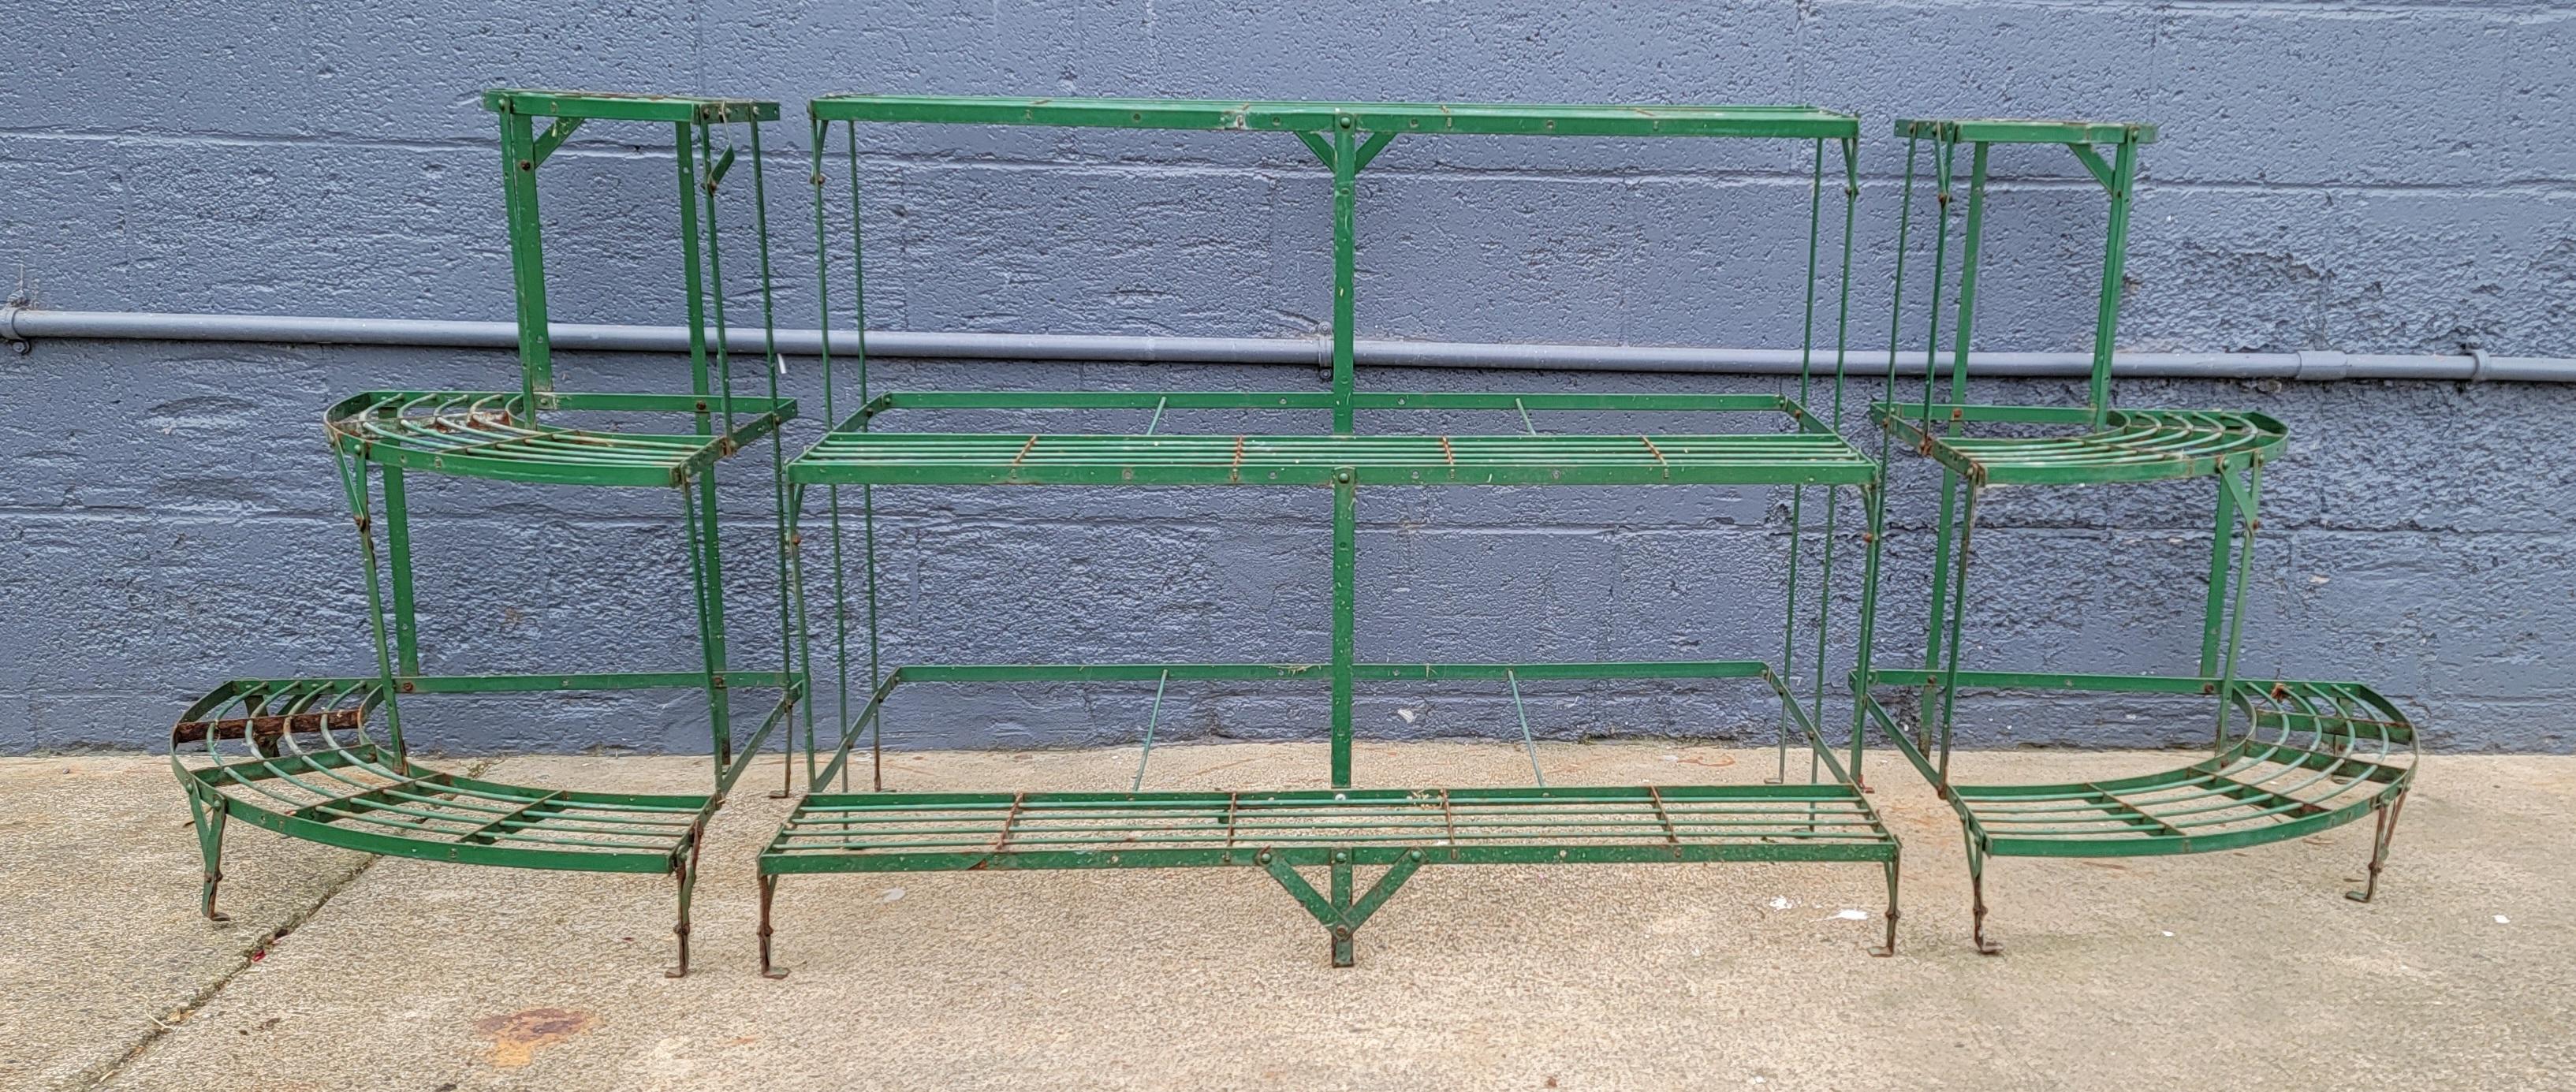 A 3 piece steel flower pot stand / commercial florist display shelf. Nice addition to a garden setting, patio or even indoor use. Center shelf measures 39.25 inches. Original green paint with areas of peeling and loss and light oxidation to steel.